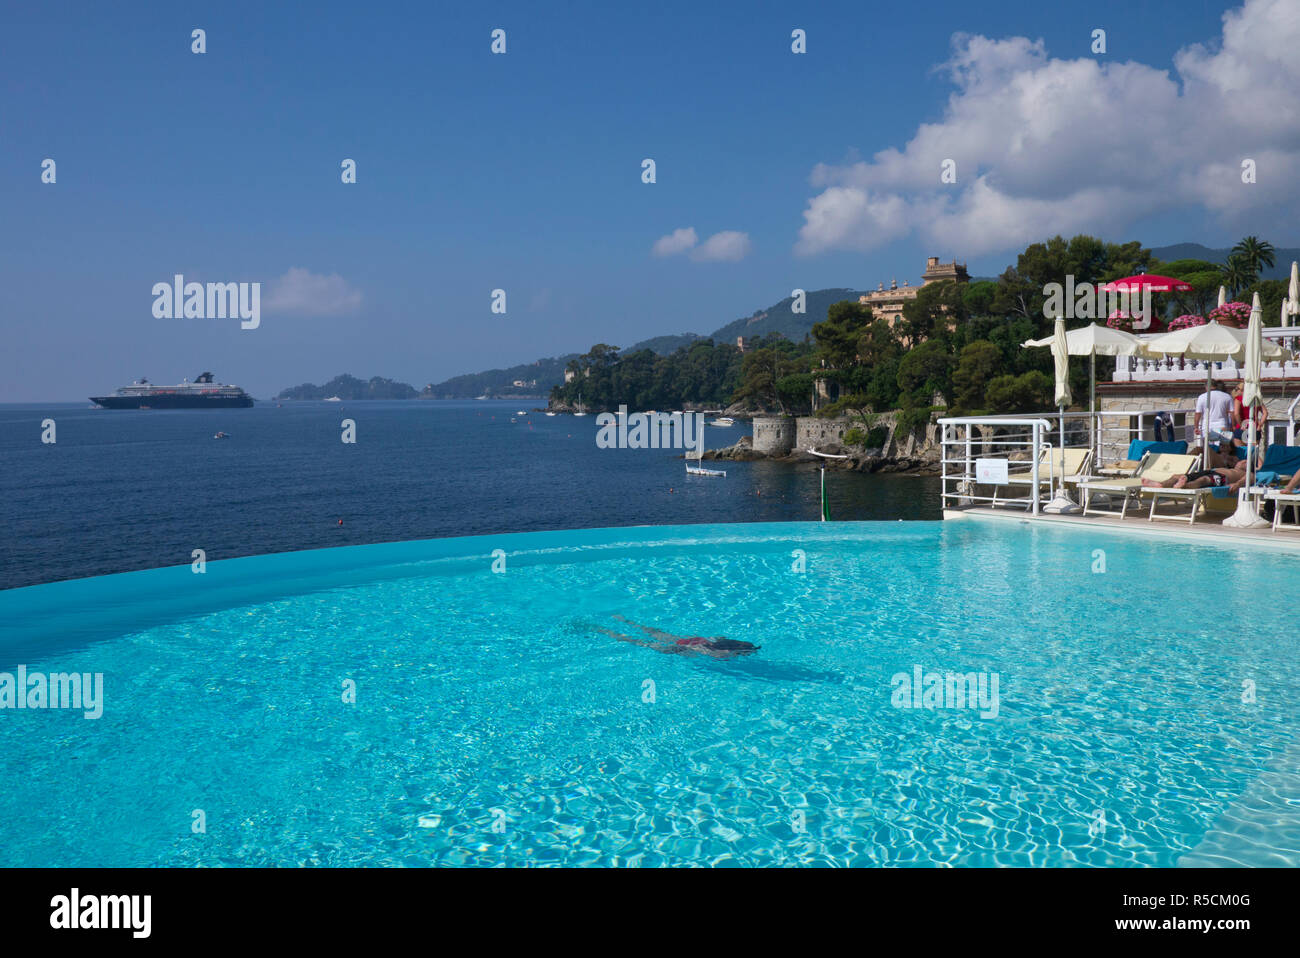 Infinity pool at the Excelsior Palace Hotel, Rapallo, Riviera di Levante, Liguria, Italy Stock Photo